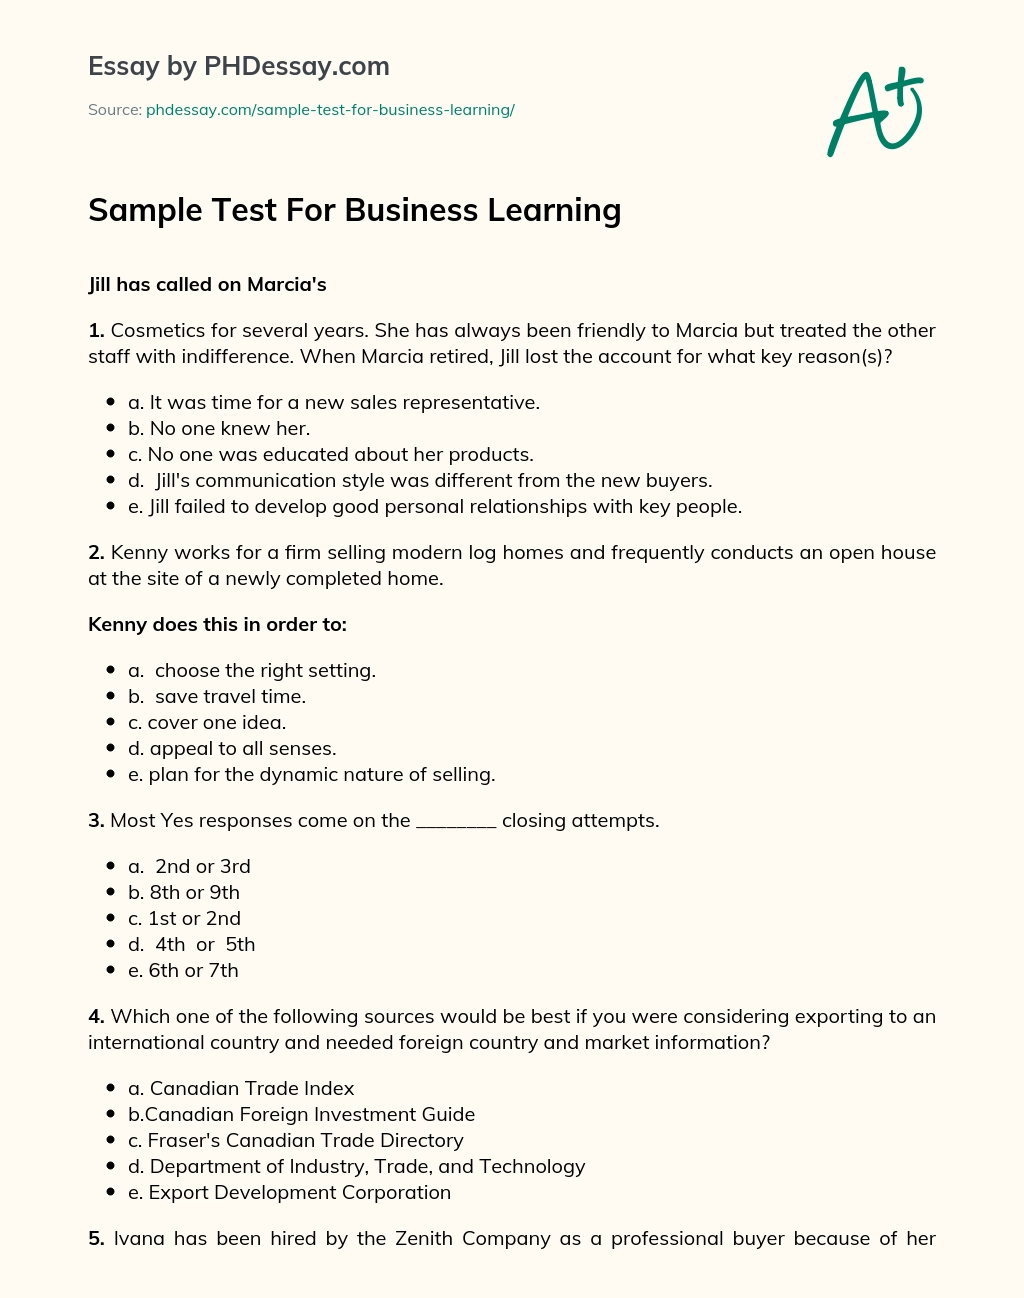 Sample Test For Business Learning essay